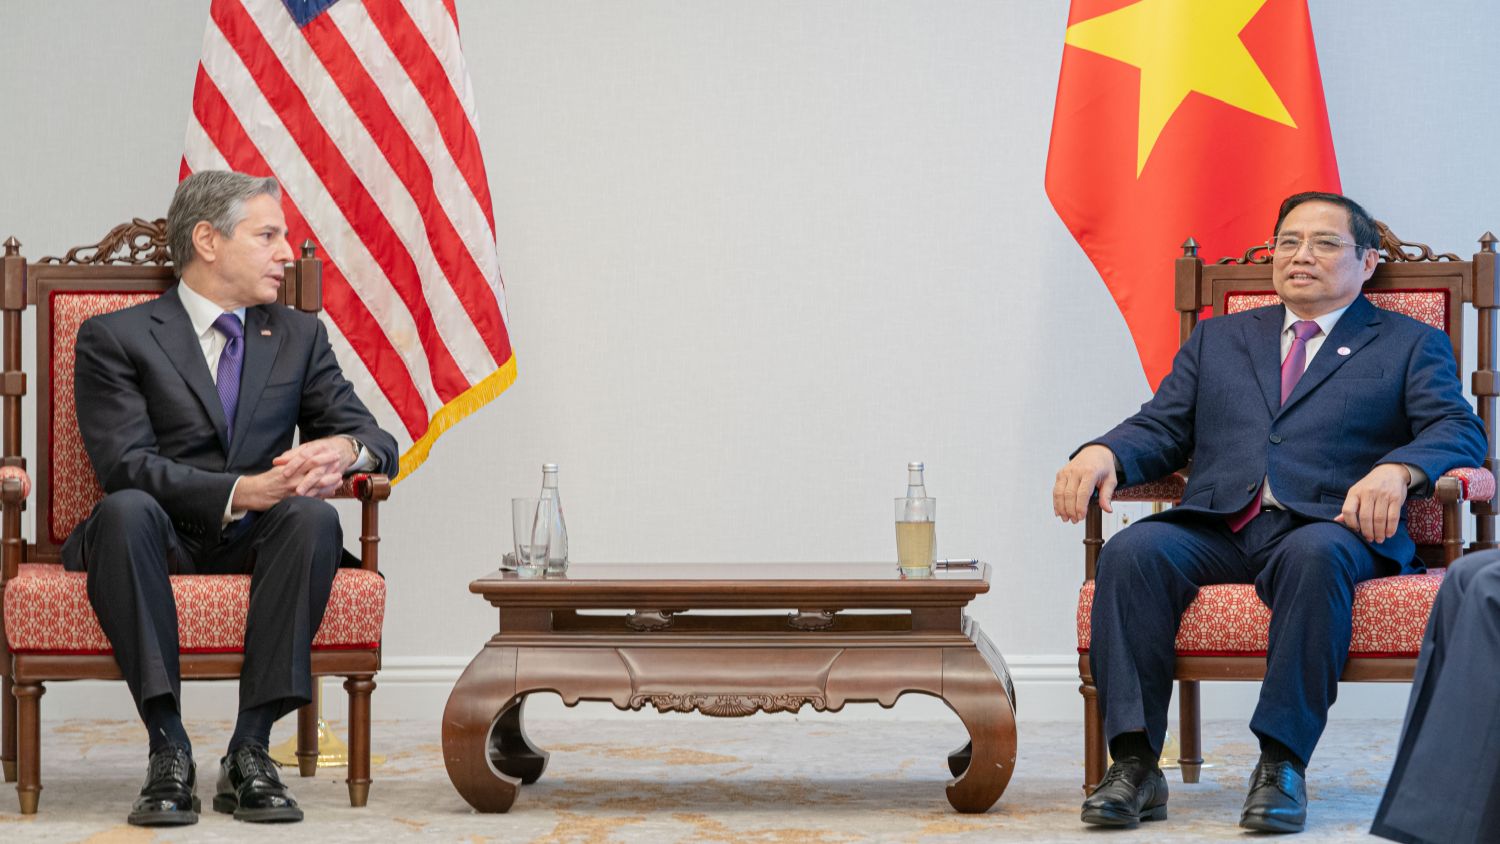 Vietnamese prime minister Pham Minh Chinh pictured with US Secretary of State Antony Blinken in May (US State Department/Public Domain)